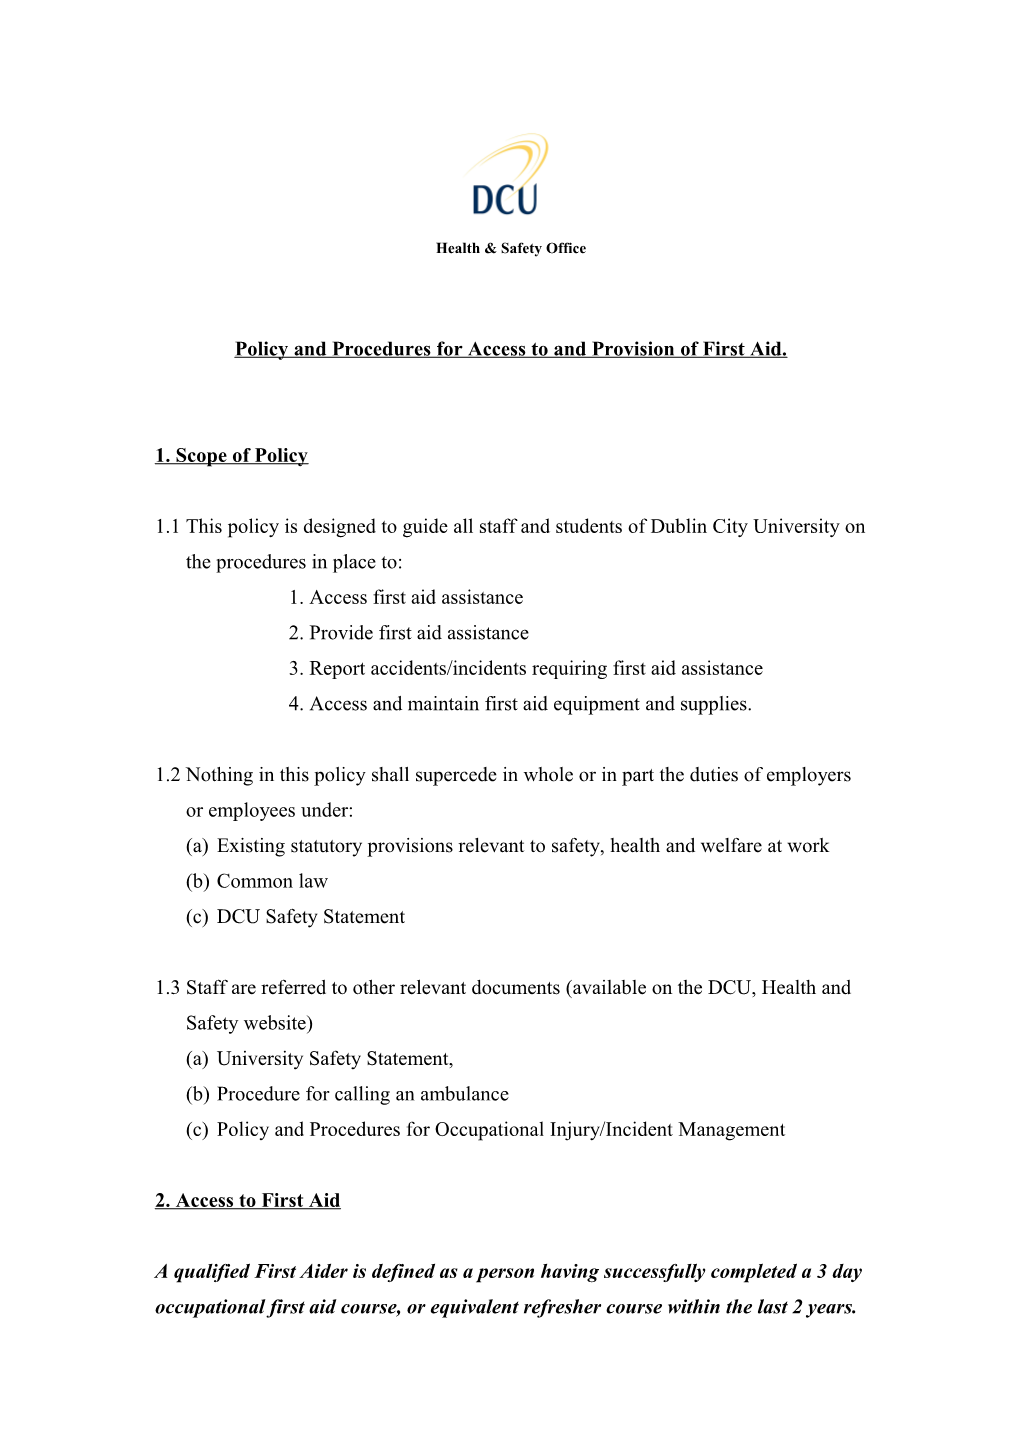 Policy and Procedures for Access to and the Provision of First Aid at DCU